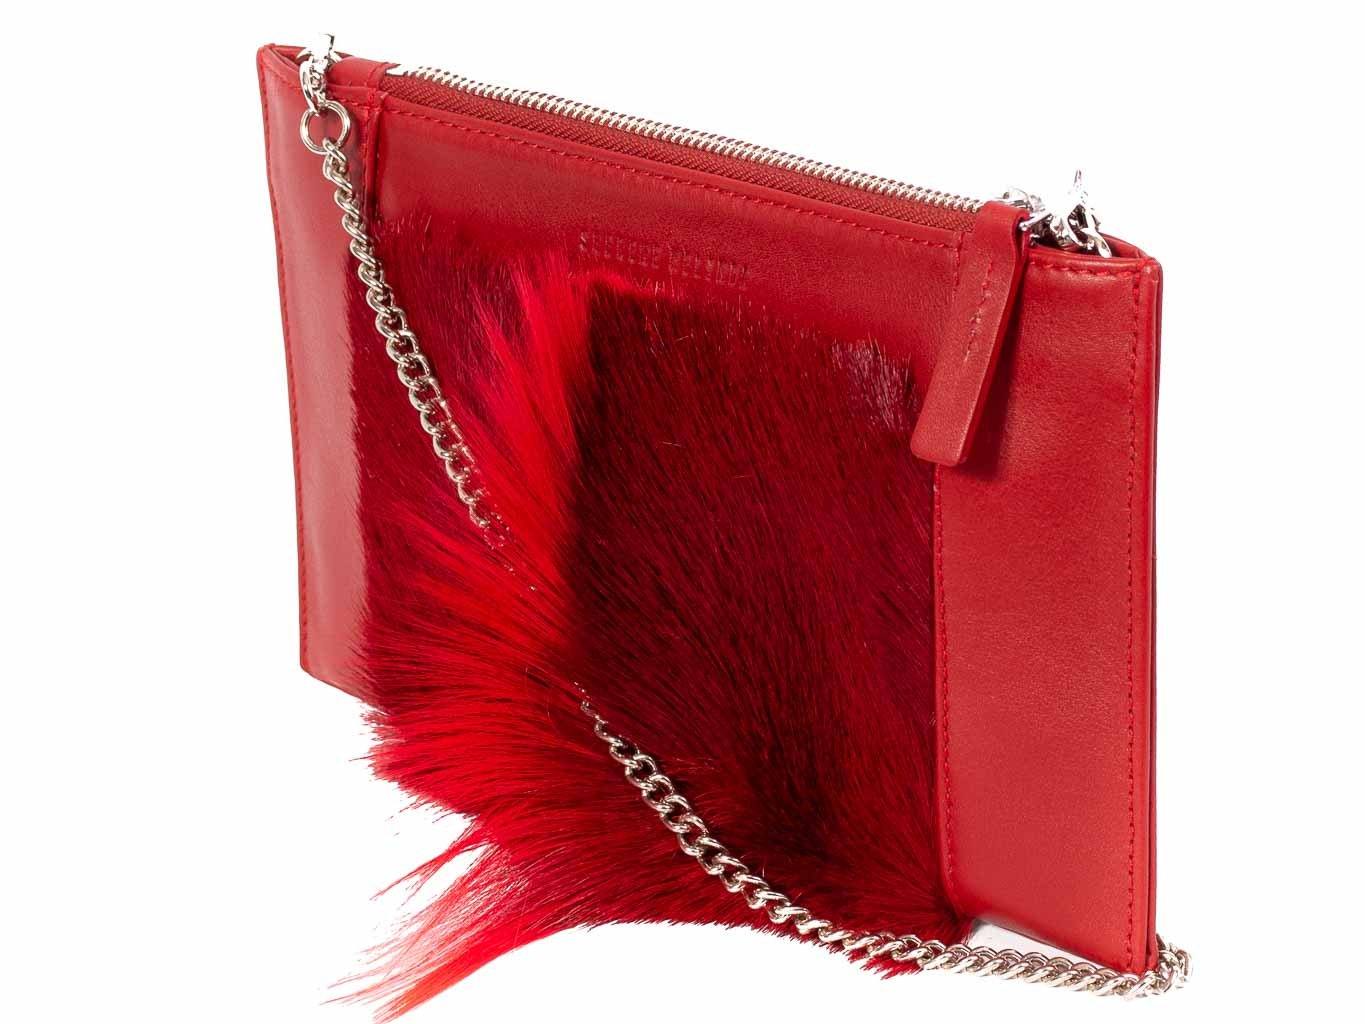 Clutch Springbok Handbag in Crimson Red with a fan feature by Sherene Melinda front strap